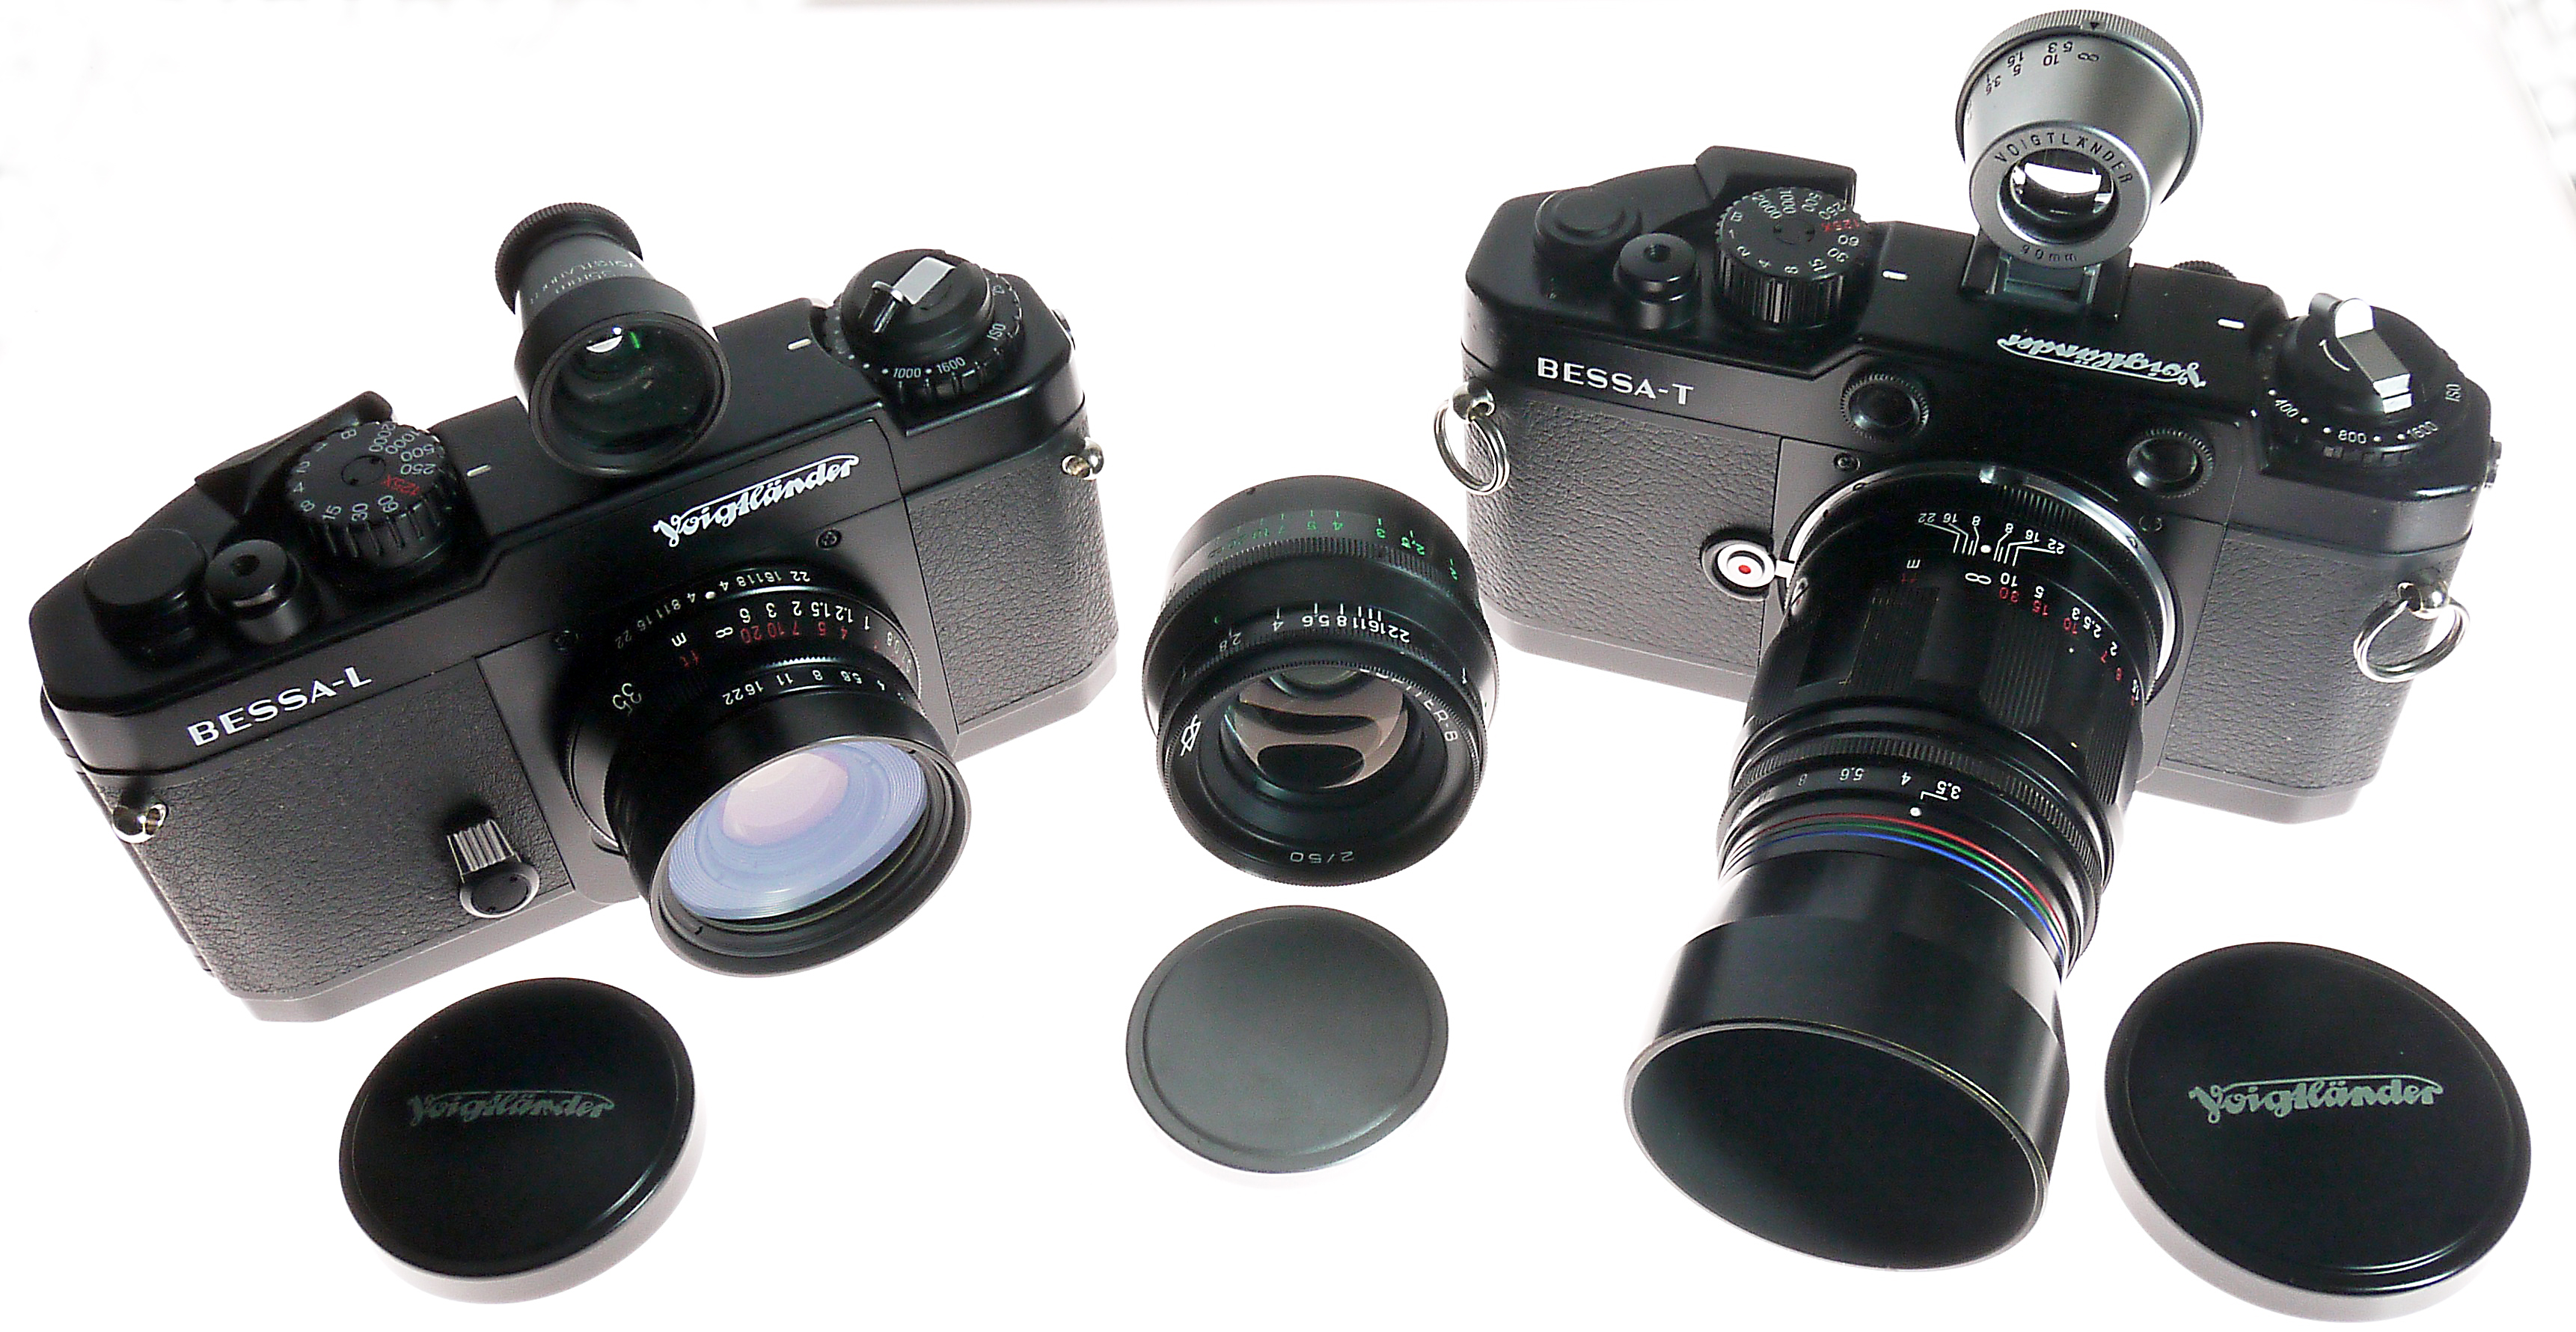 Lens, camera mount or rangefinder – which is the focus culprit